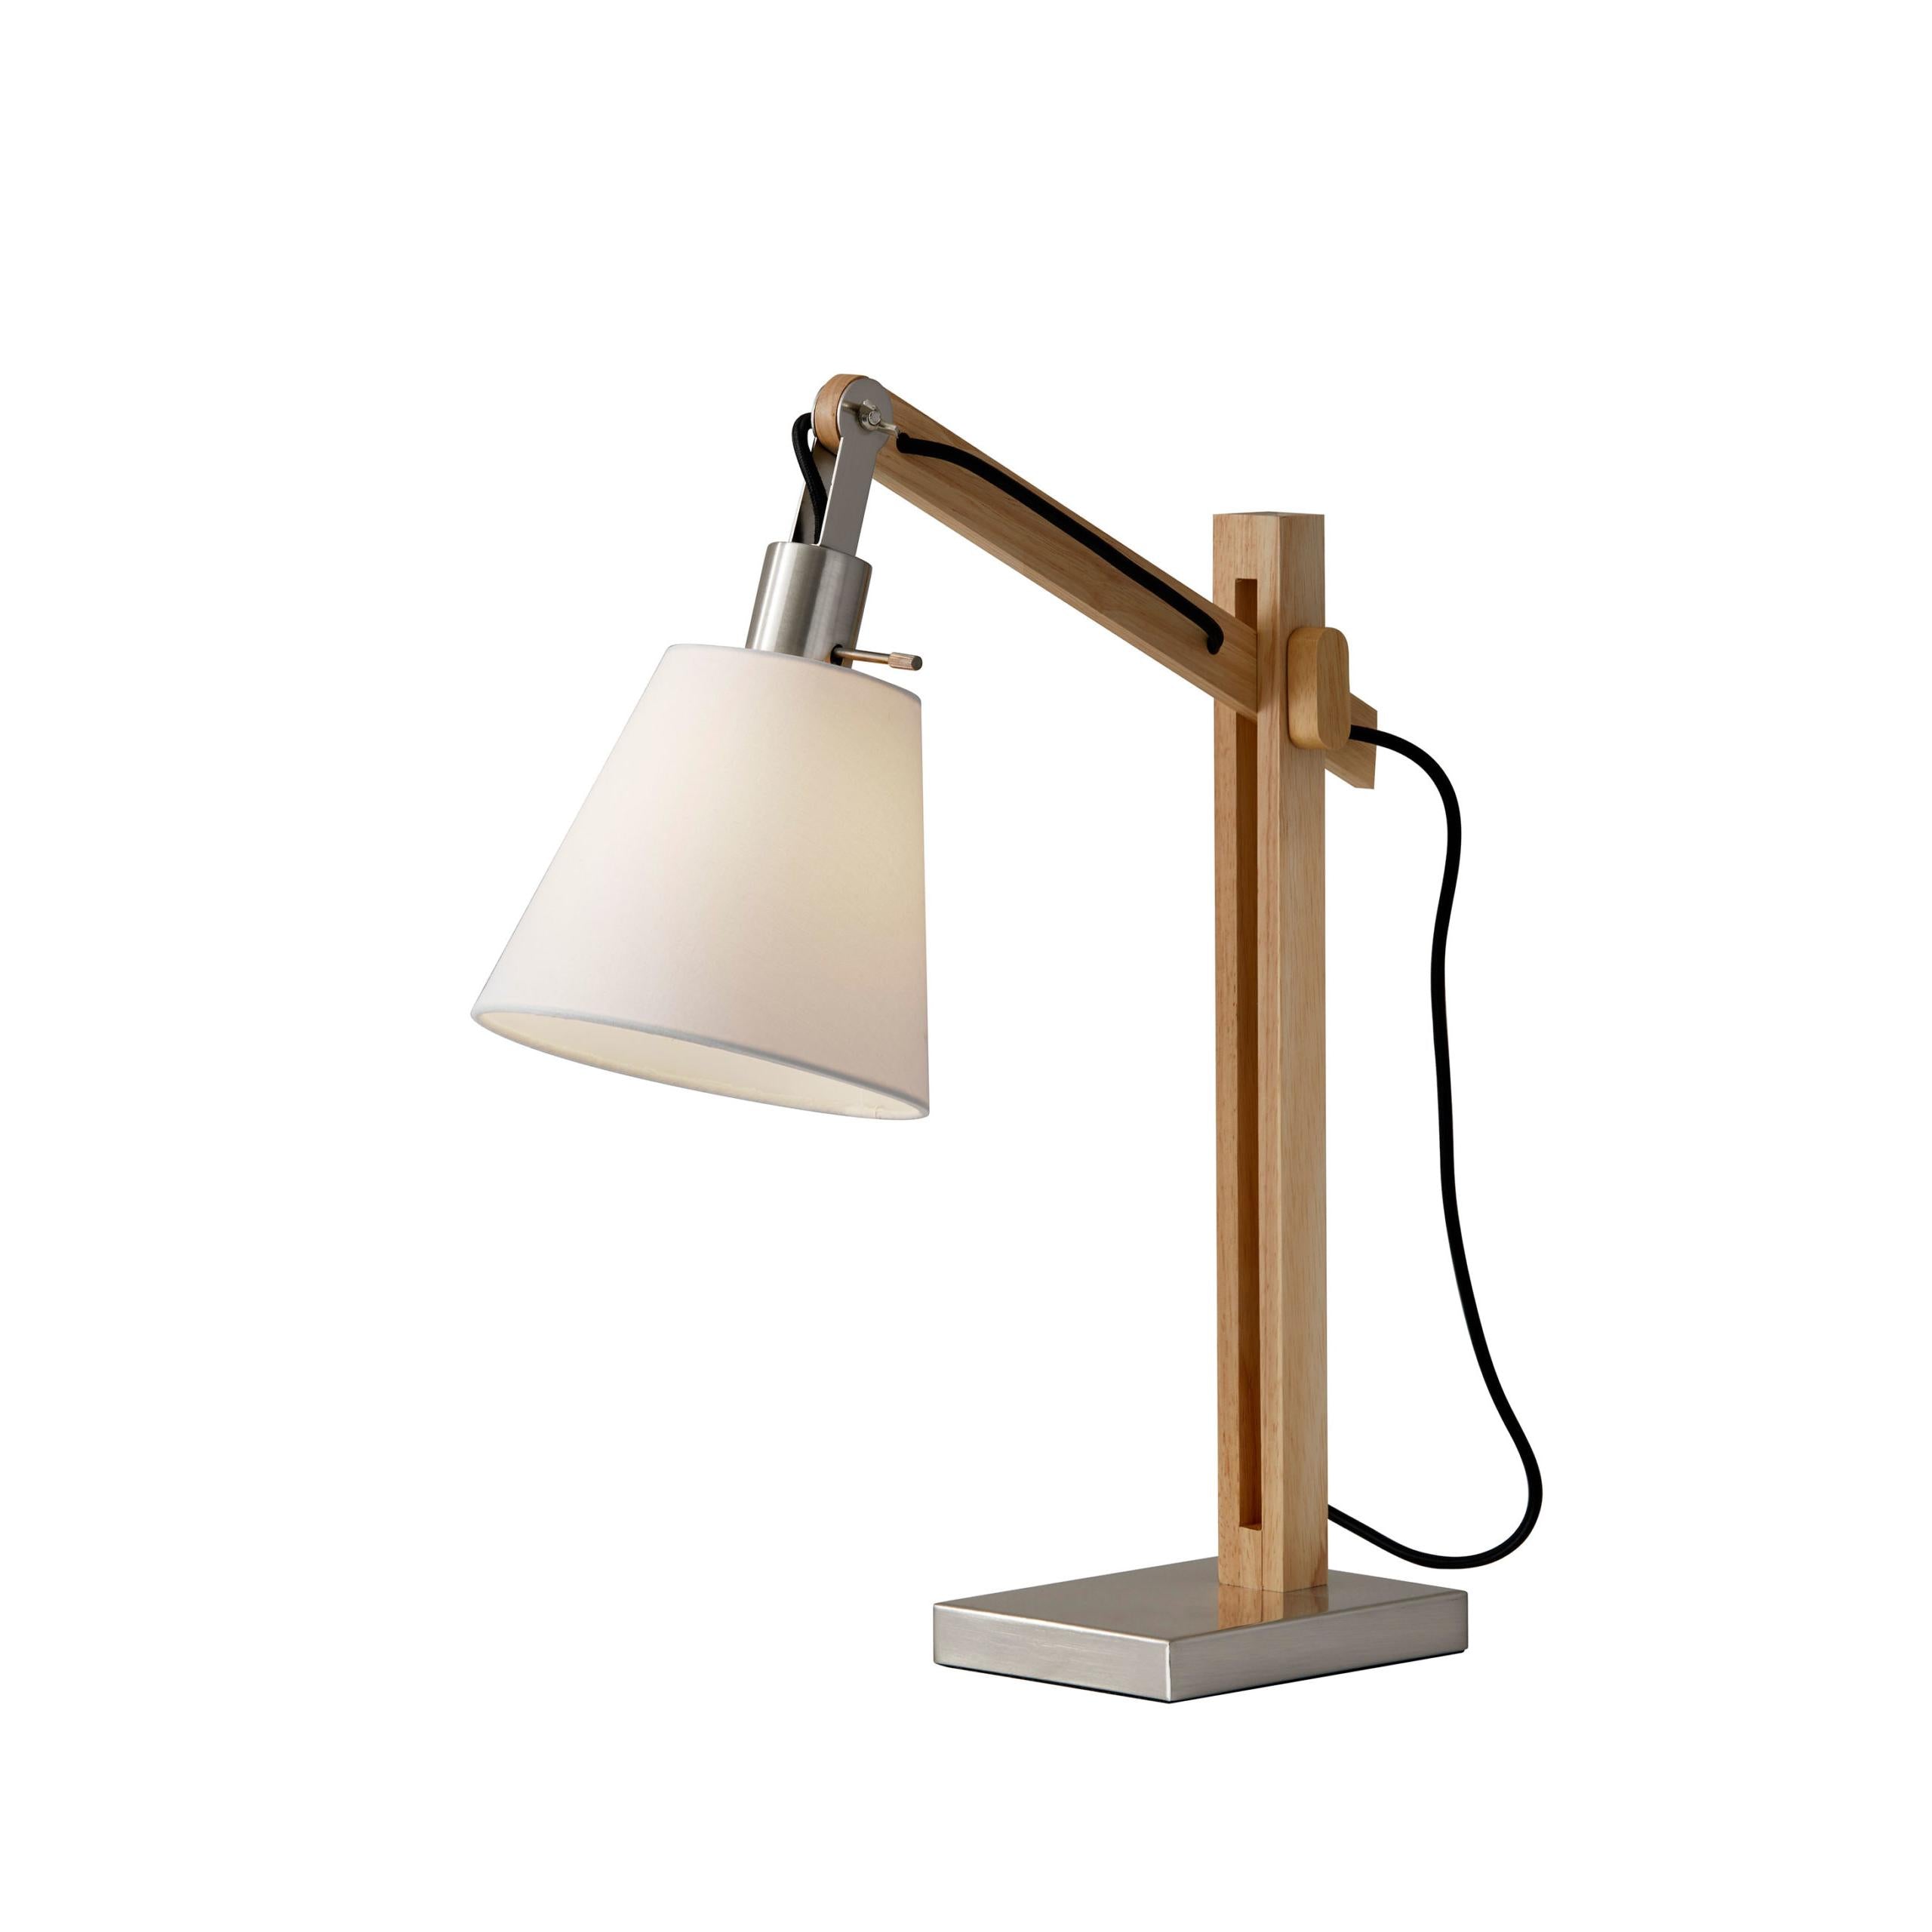 WALDEN Table lamp Wood - 4088-12 | ADESSO